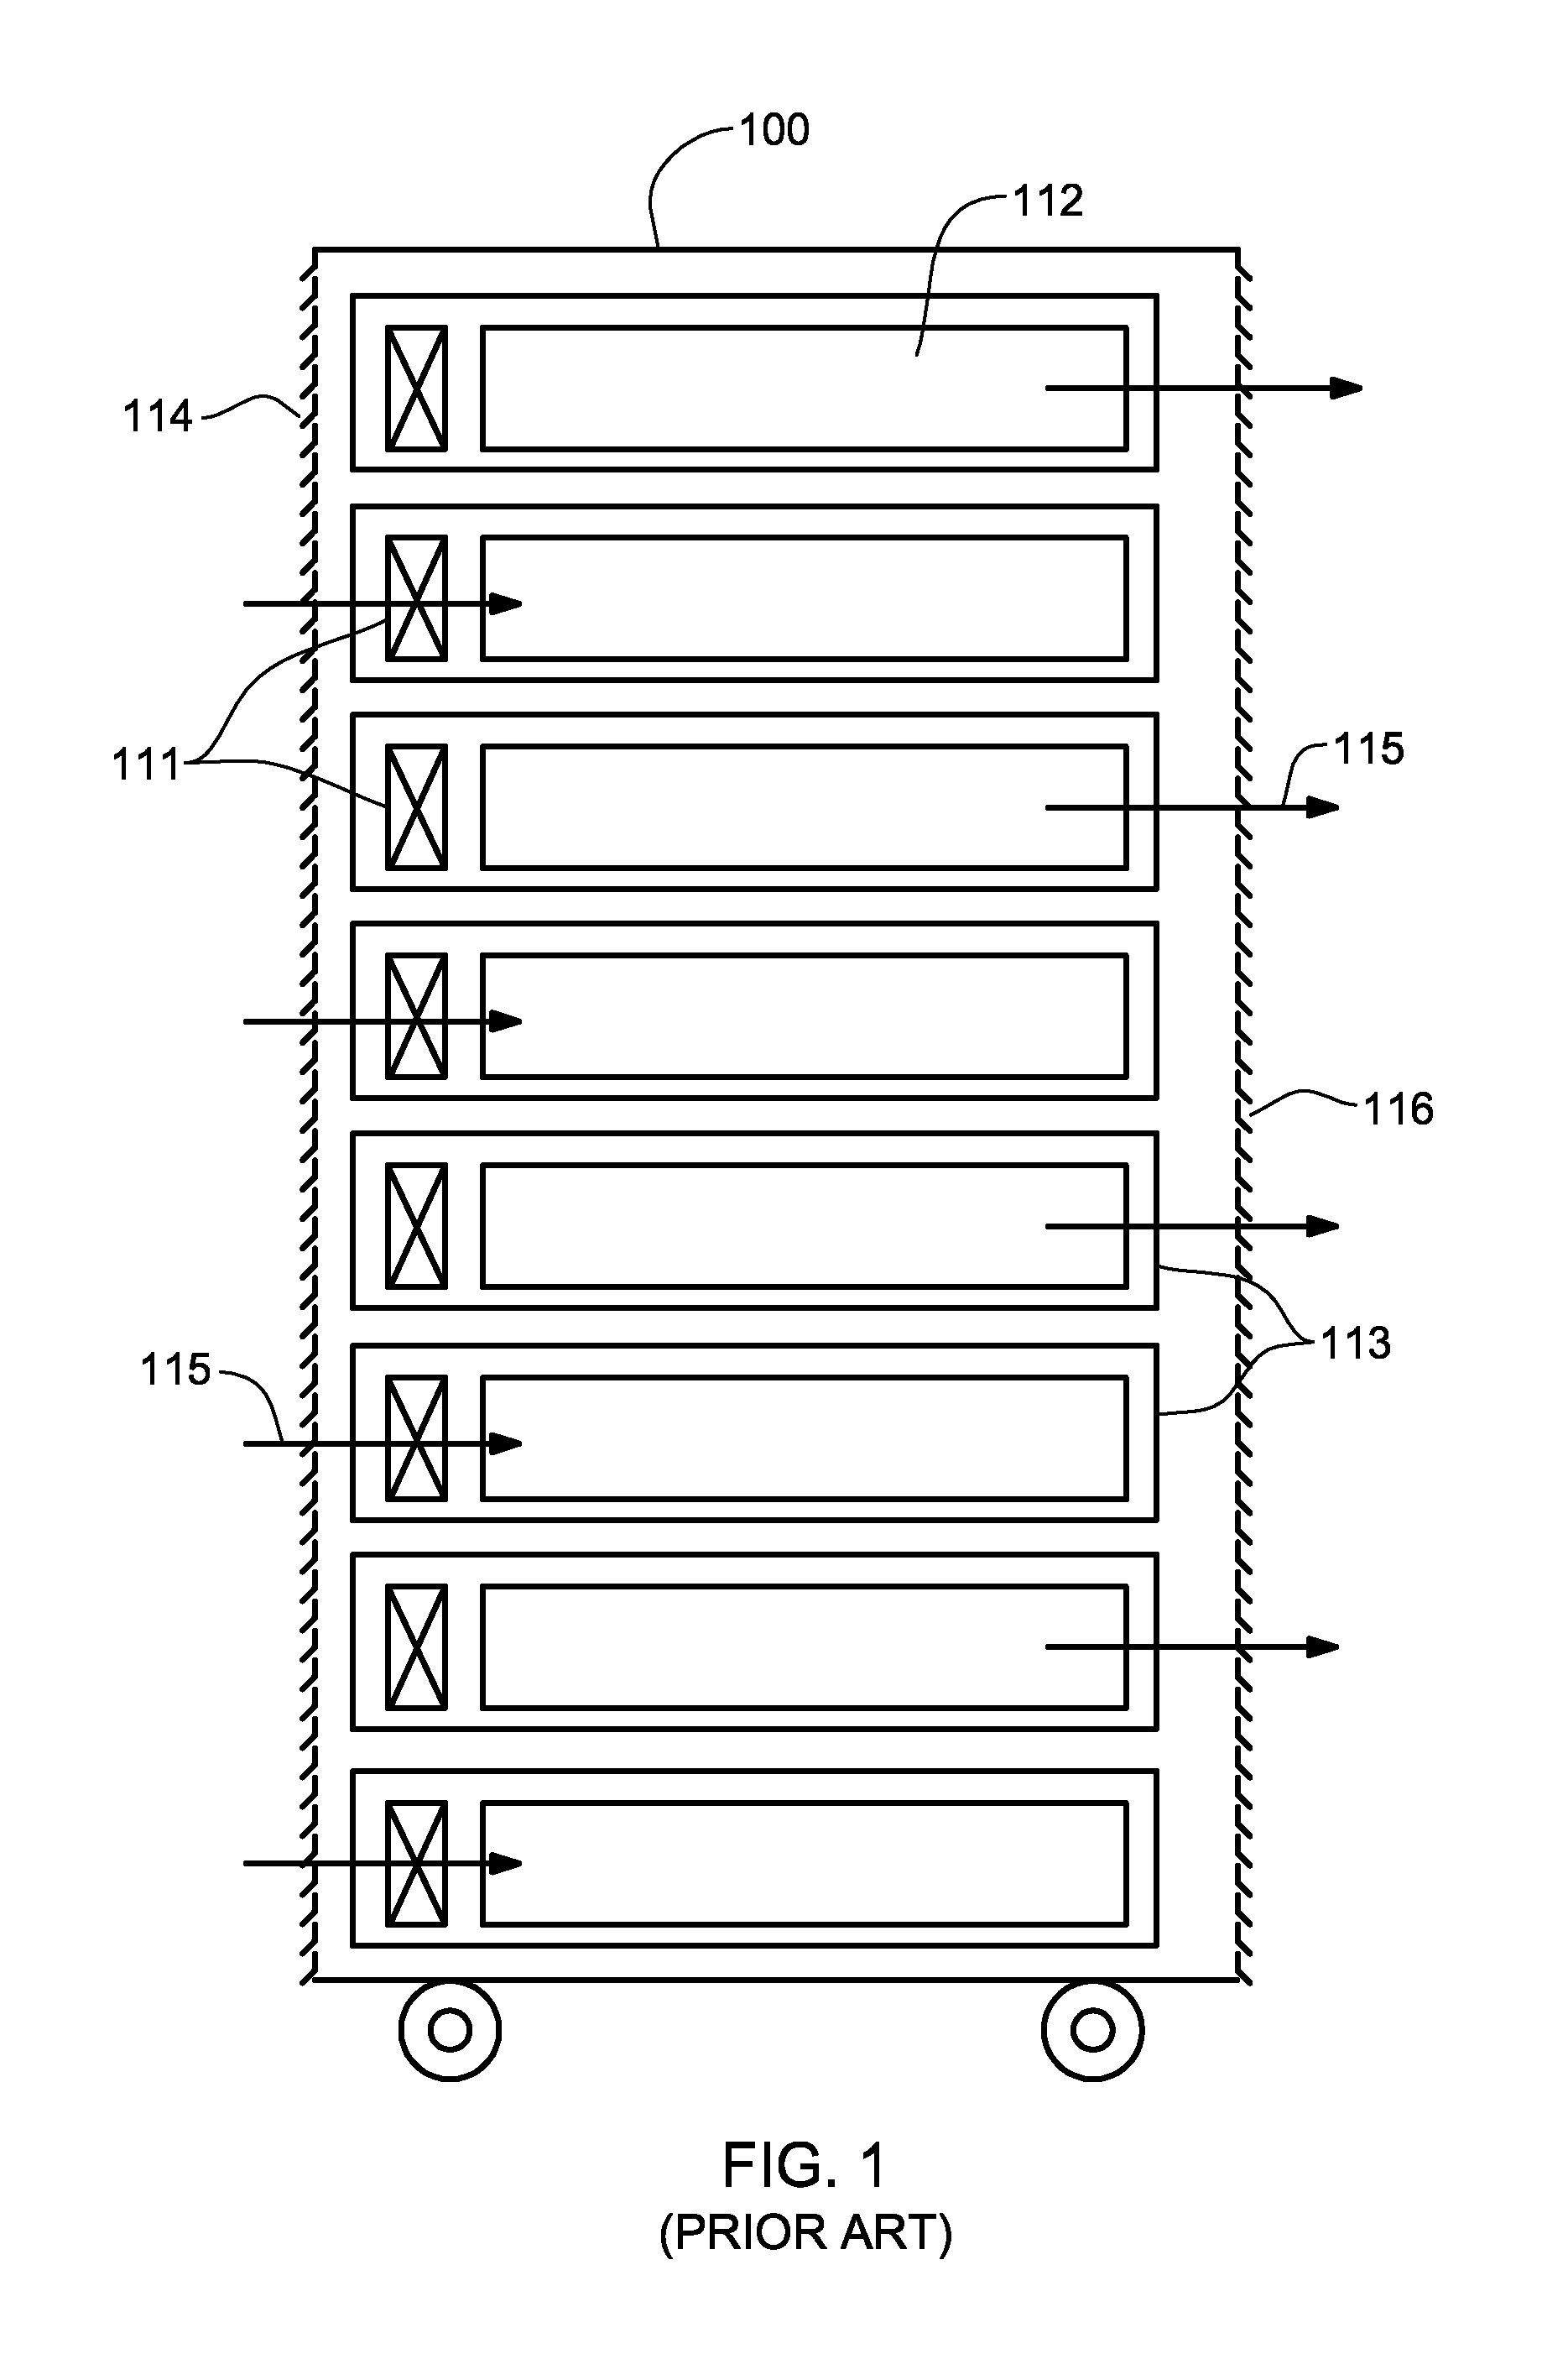 Liquid-based cooling apparatus for an electronics rack